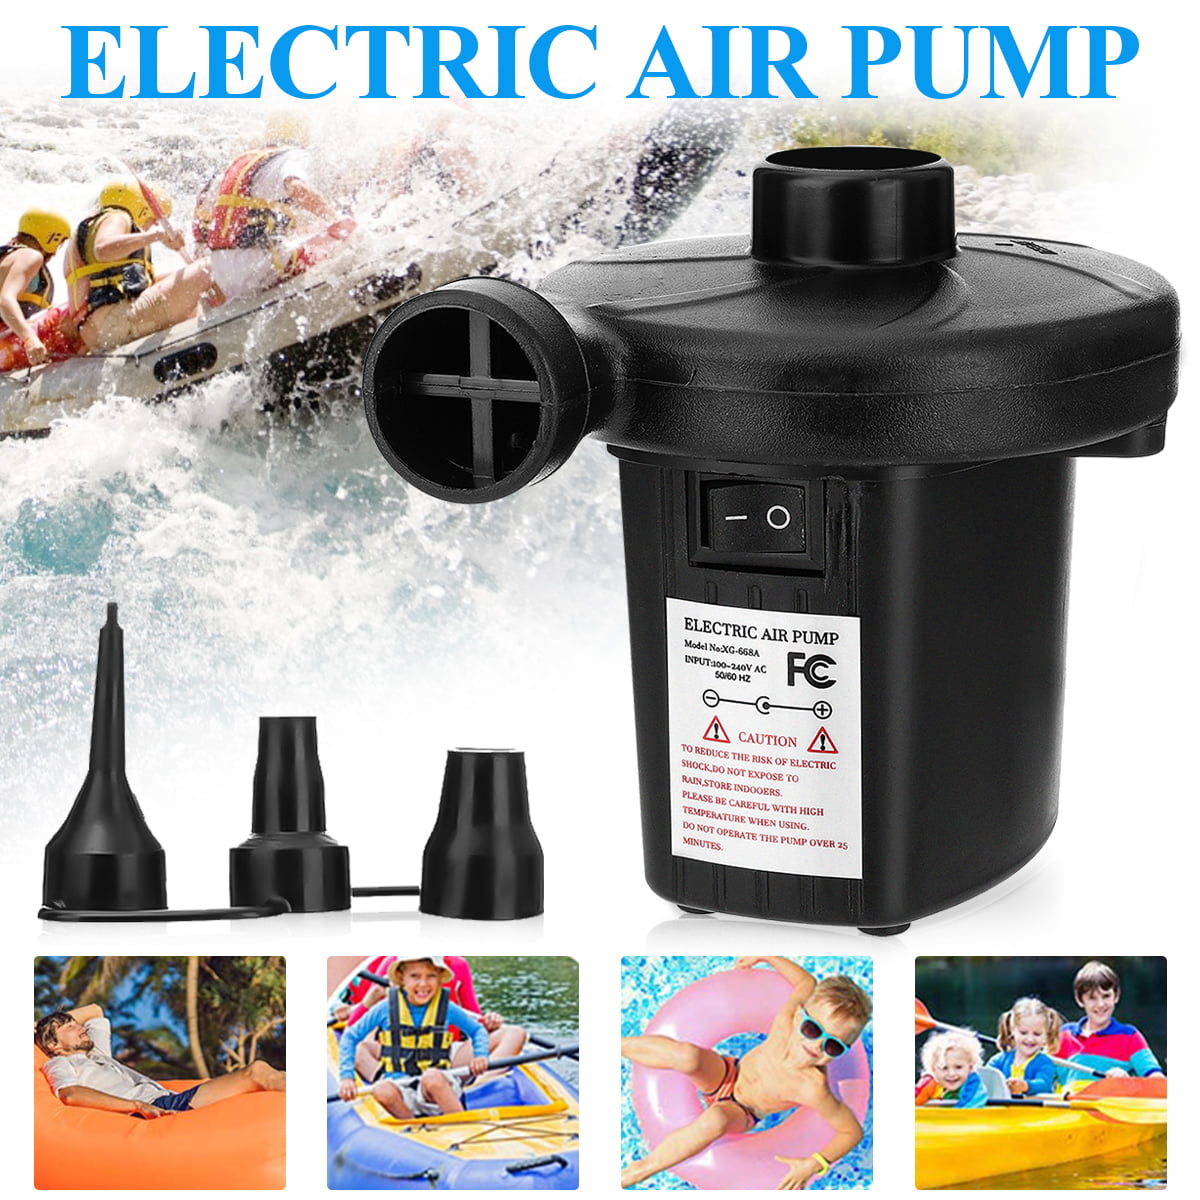 Inflatable Pool Toys Electric Air Pump Portable Quick-Fill Air Pump for Inflatable Couch Quick-Fill Electricinflator Swimming Ring Electric Air Pump for Inflatables Air Mattress